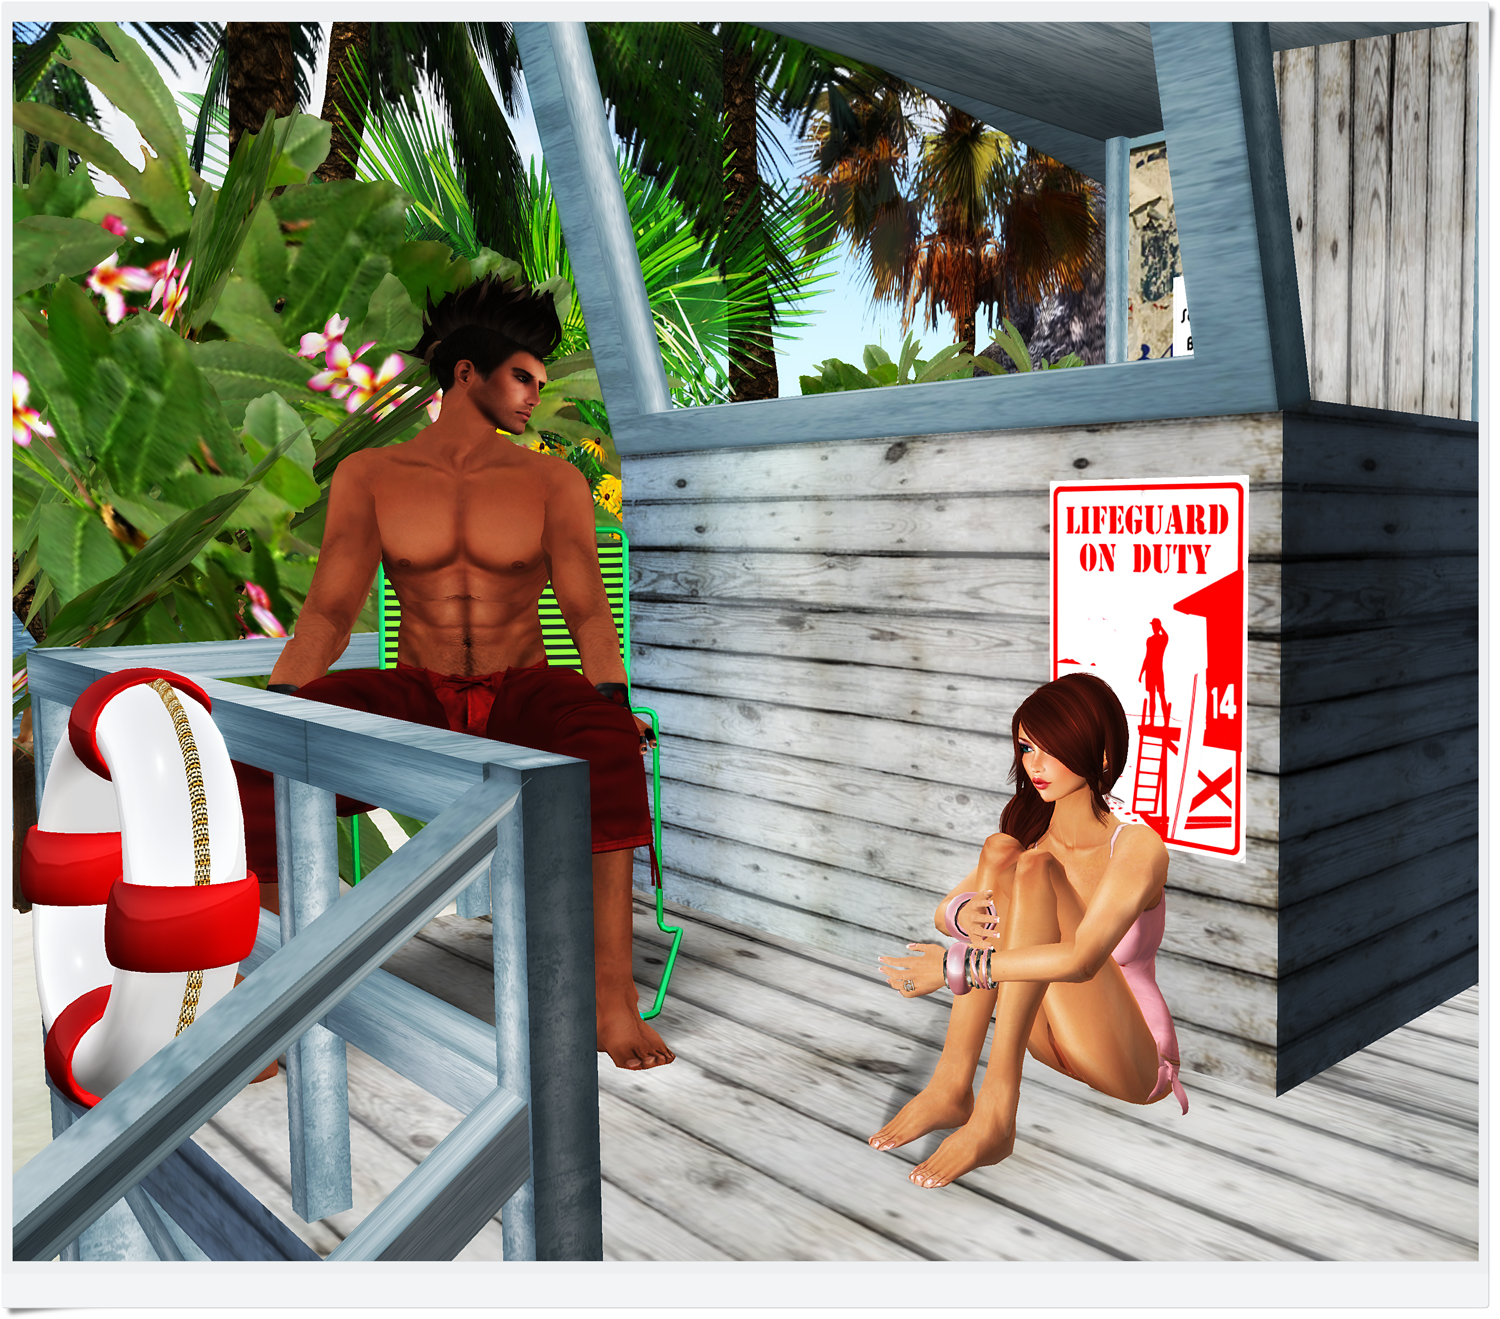 Belle Belle The Naughty Lifeguard